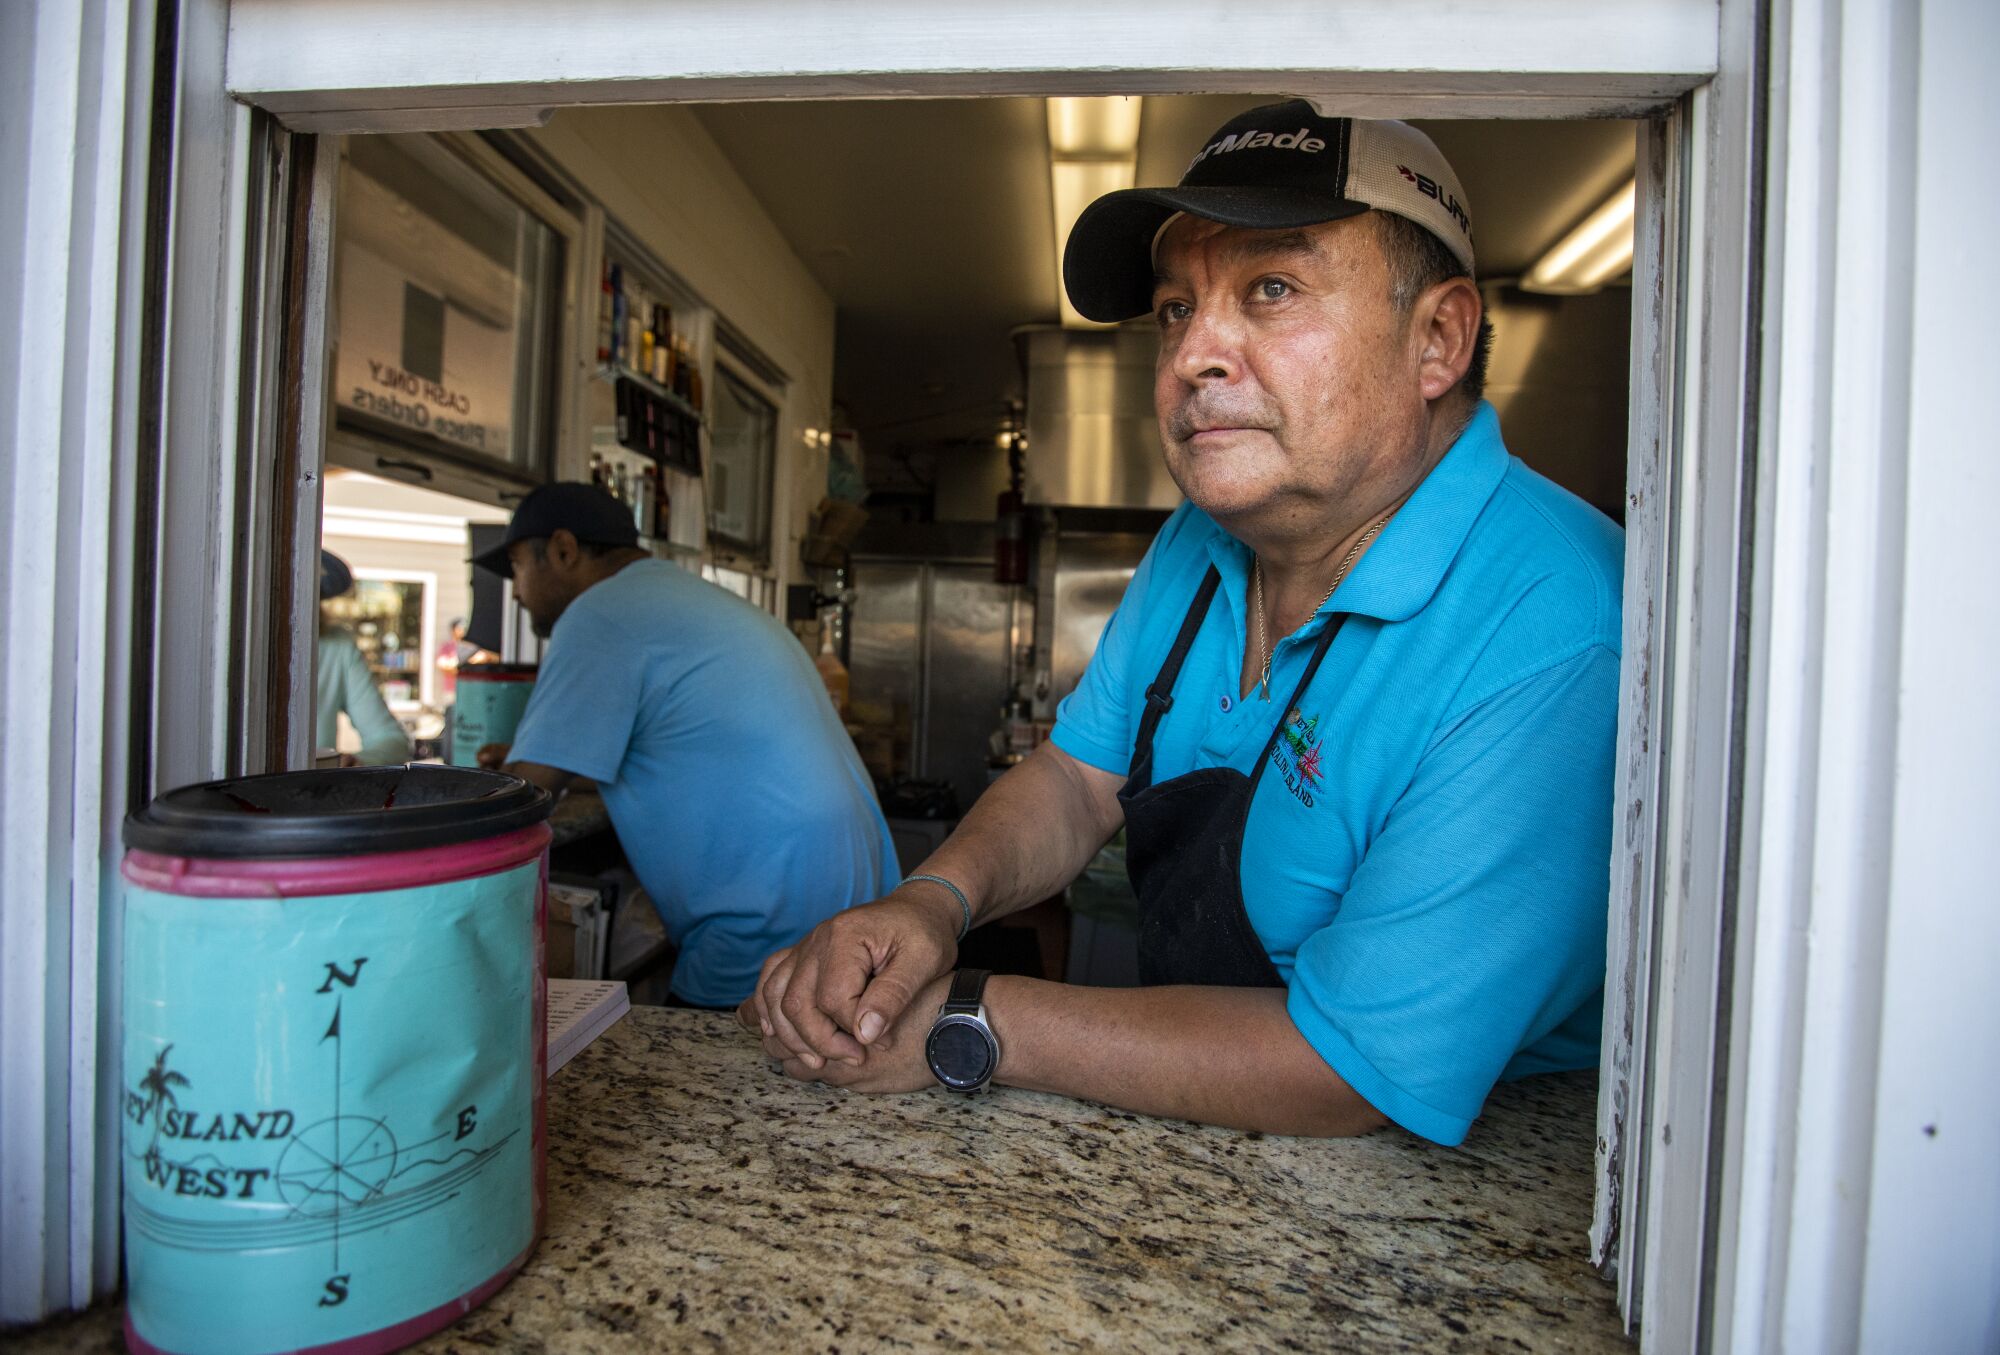 Alex Romero looks out the customer-service window of a restaurant